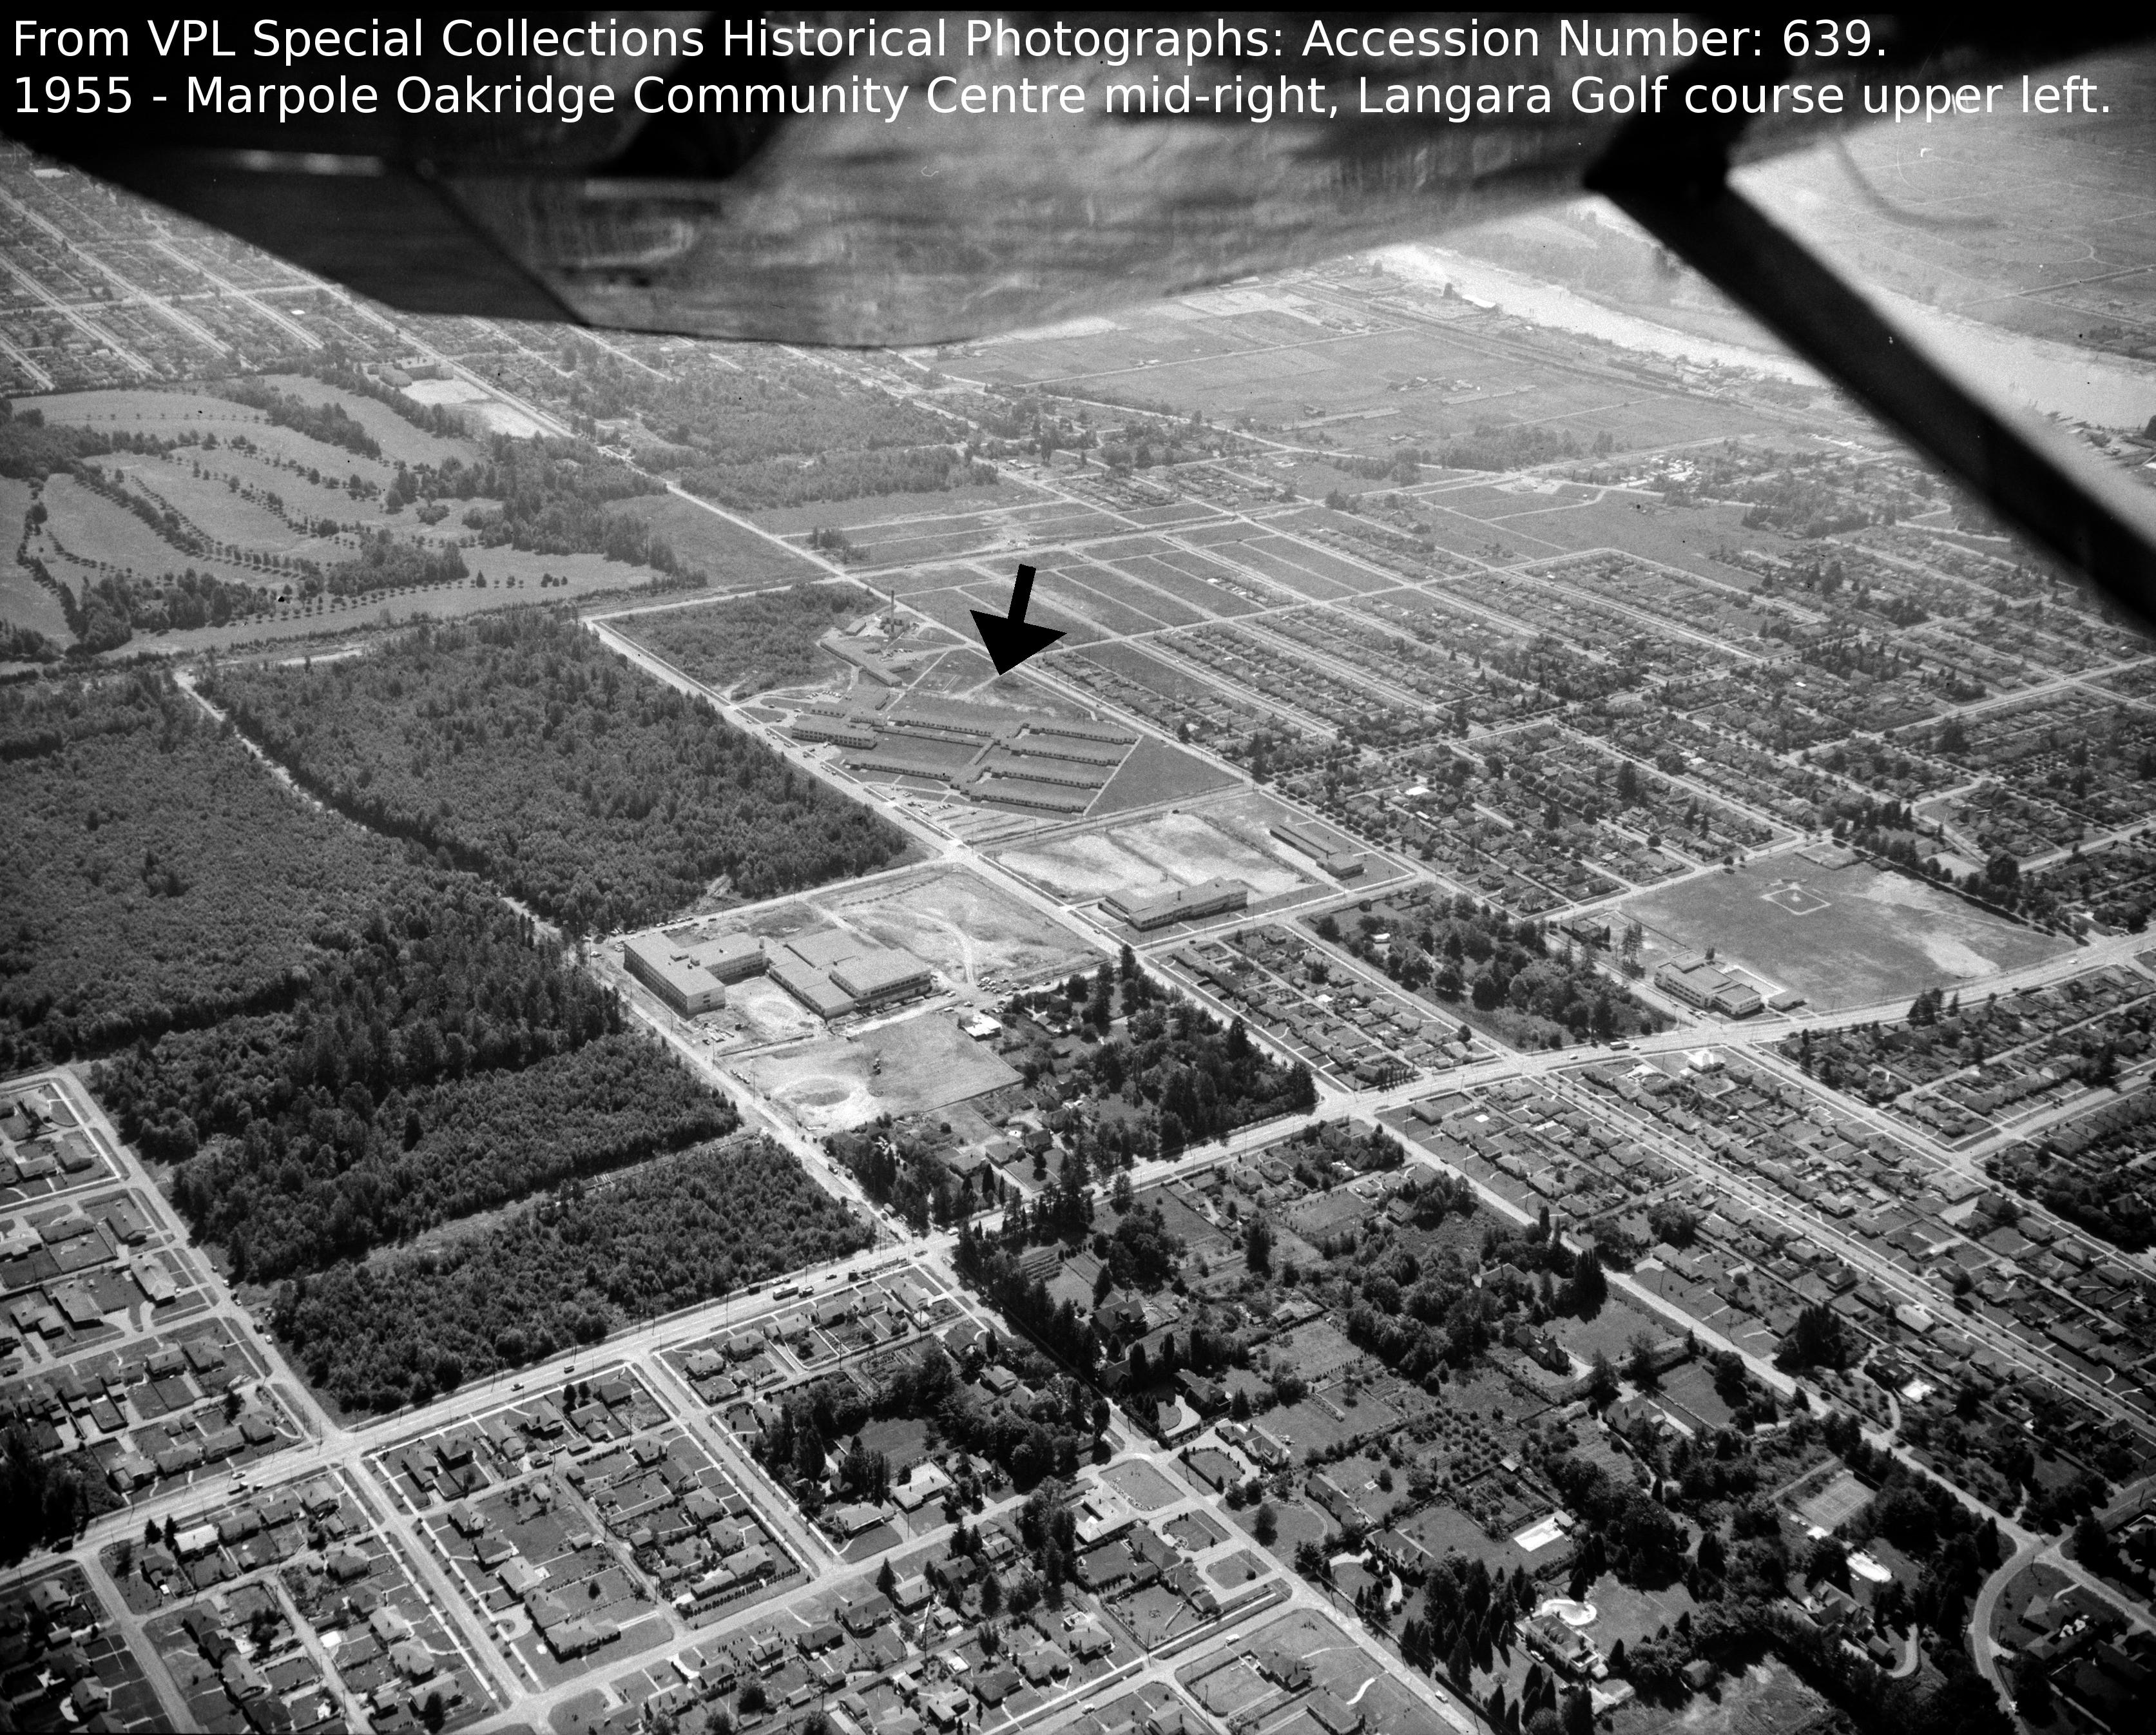 From VPL Special Collections Historical Photographs: 1955 - Marpole Oakridge Community Centre.